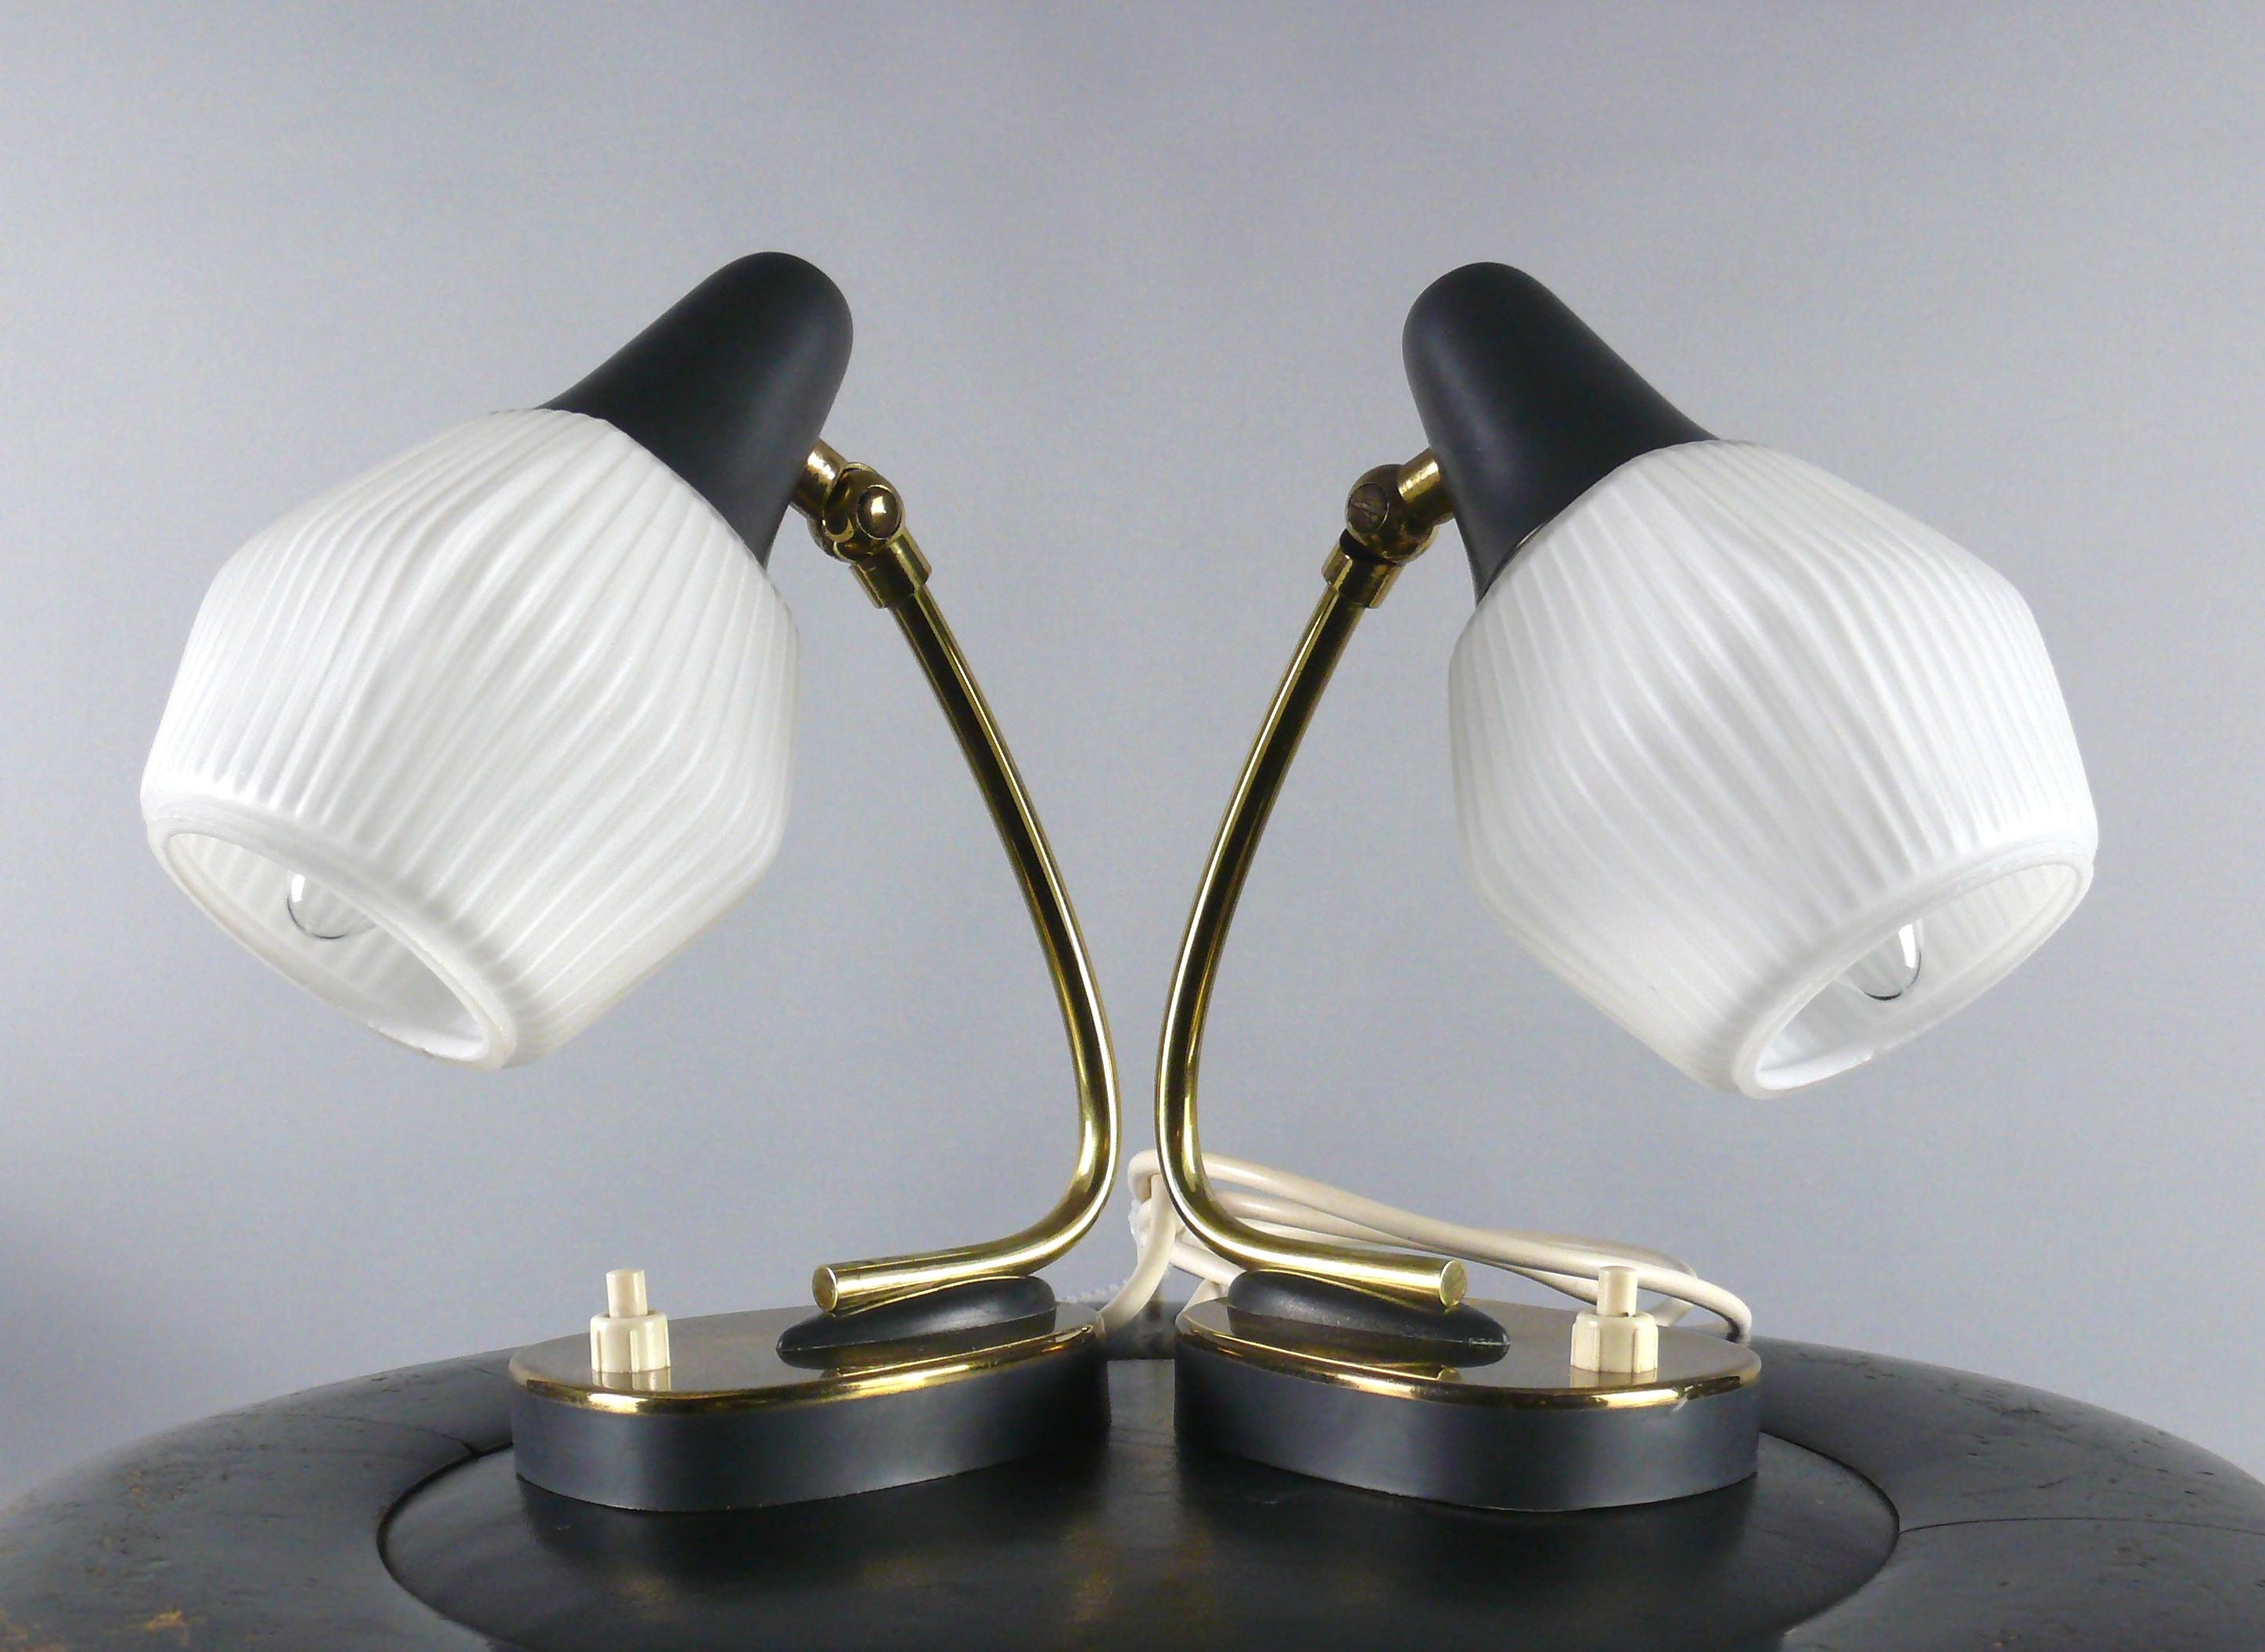 Two bedside lamps made in Germany in the 1960s . The lamps have an opaline glass lampshade and a design which contrasts between dark grey and brass areas. The lampshades can be adjusted with a joint. The lights are switched on and off via a switch